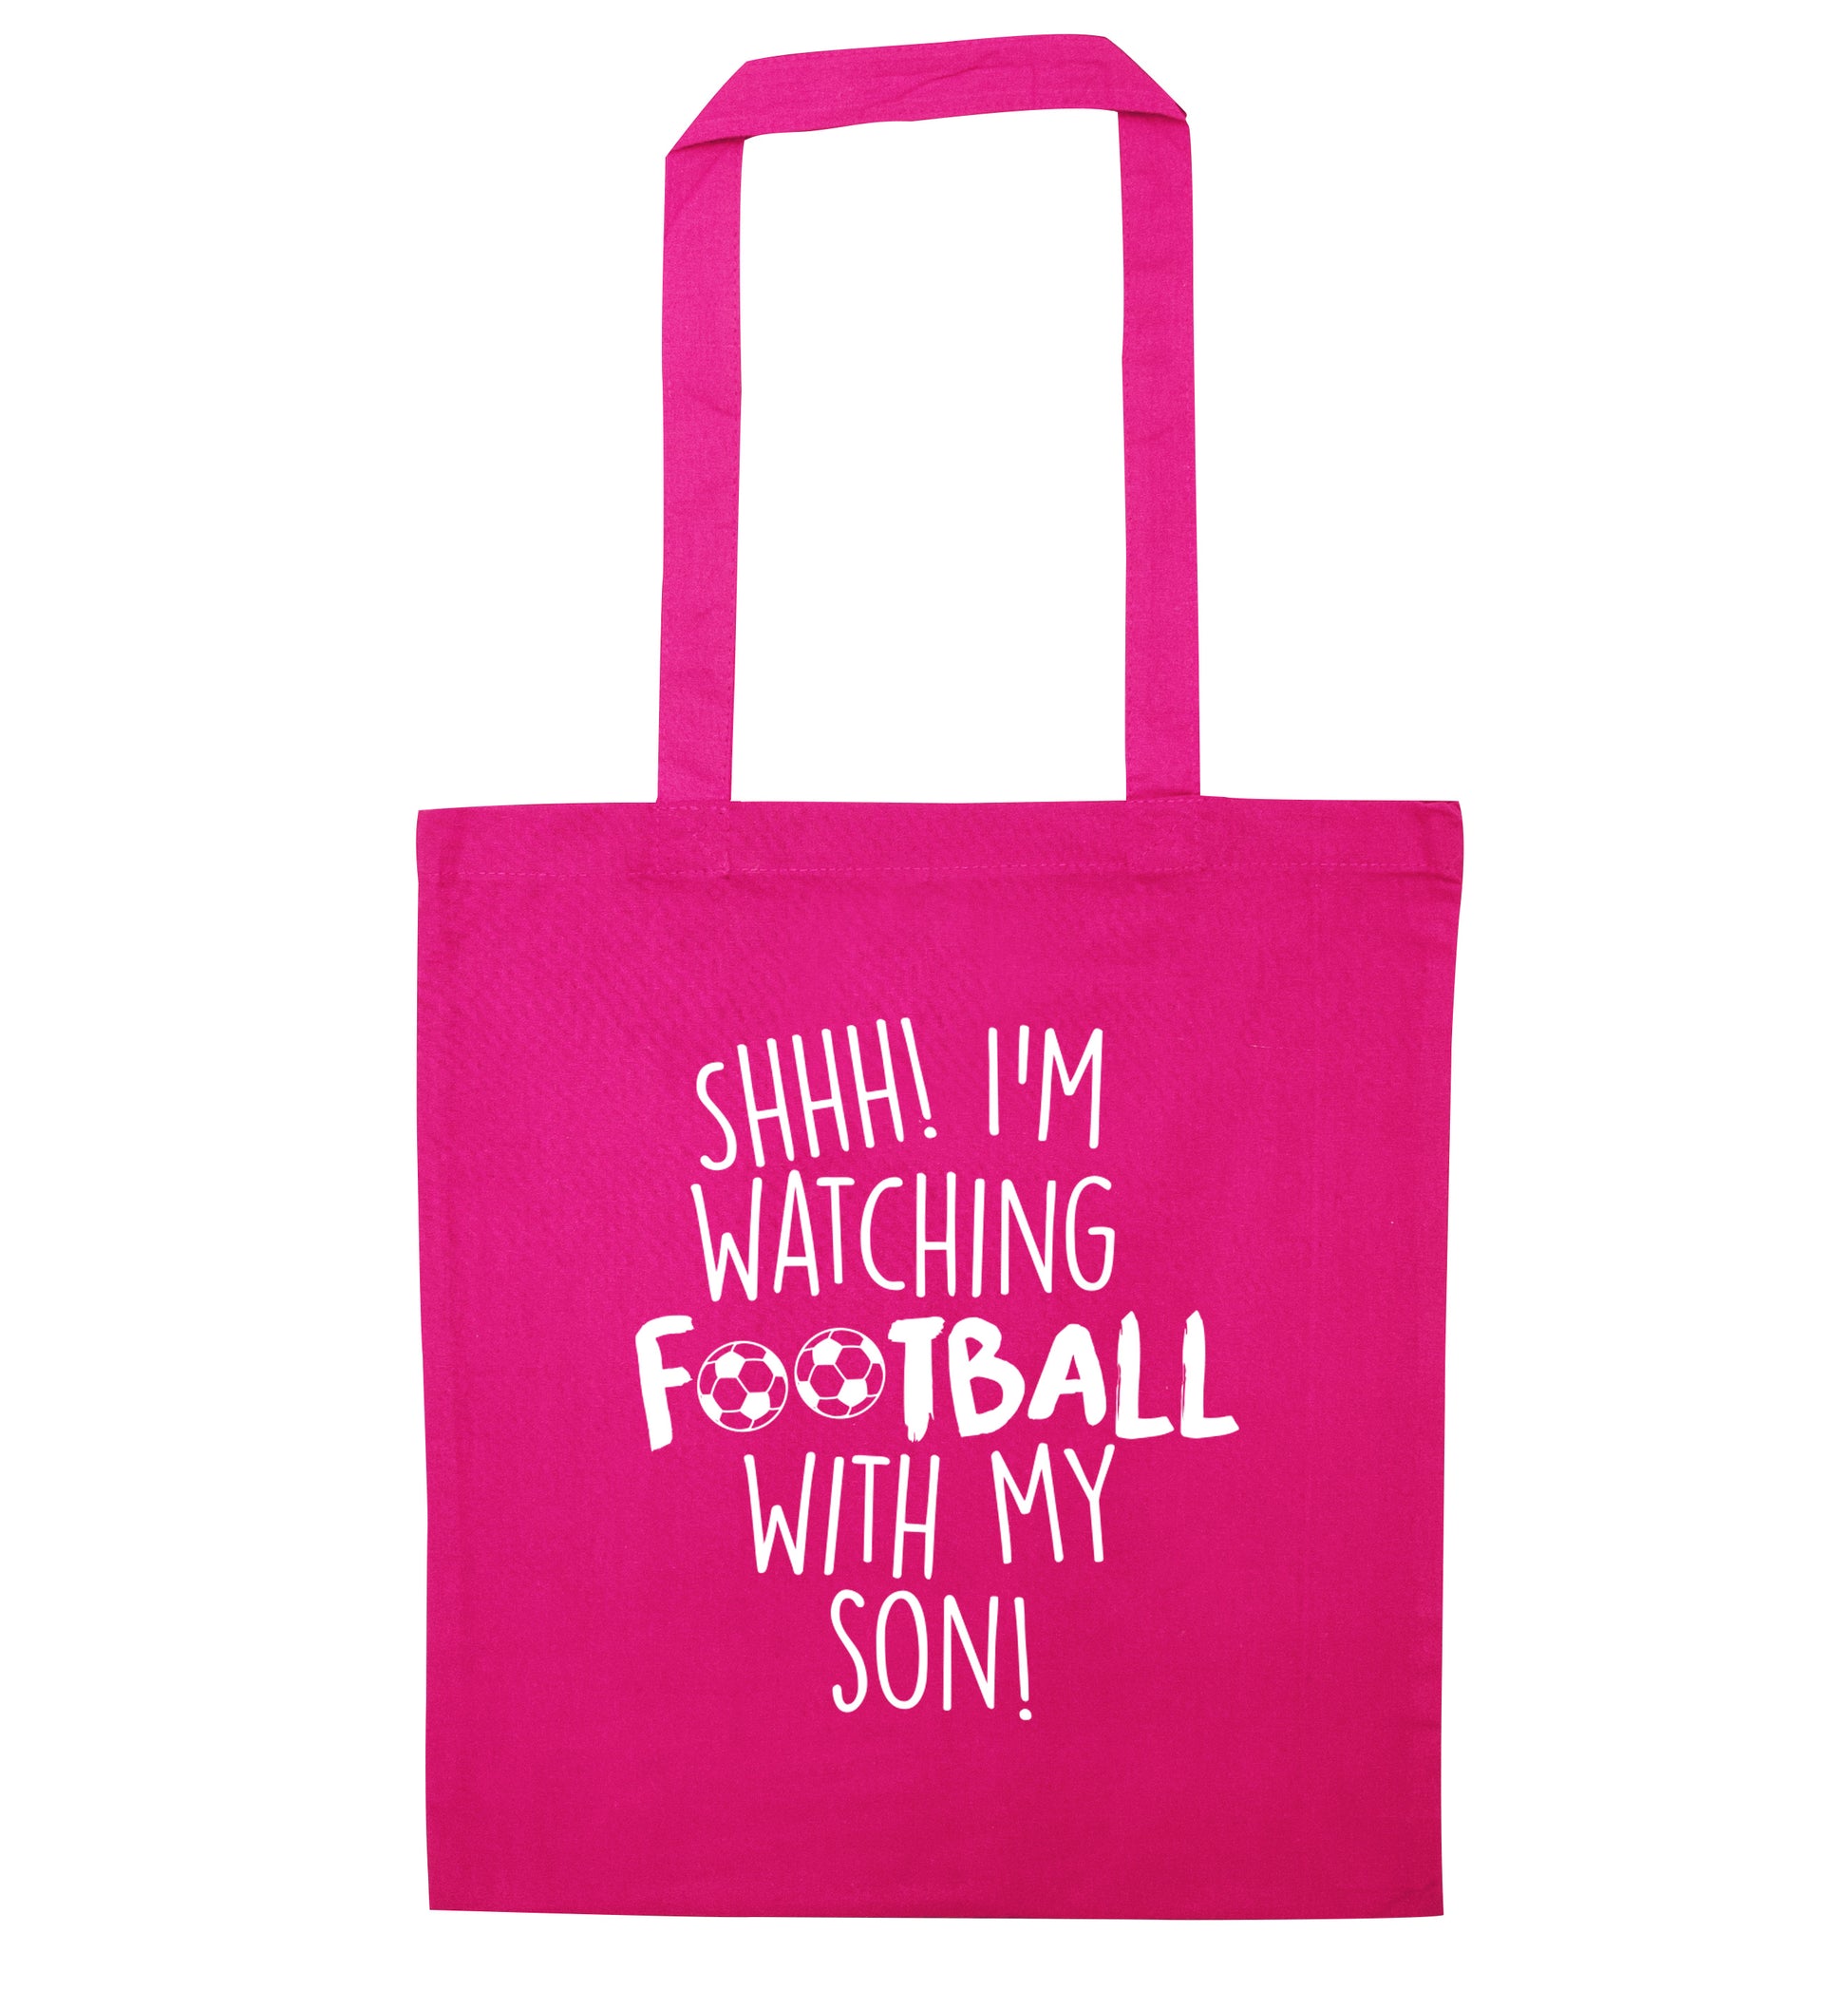 Shhh I'm watching football with my son pink tote bag